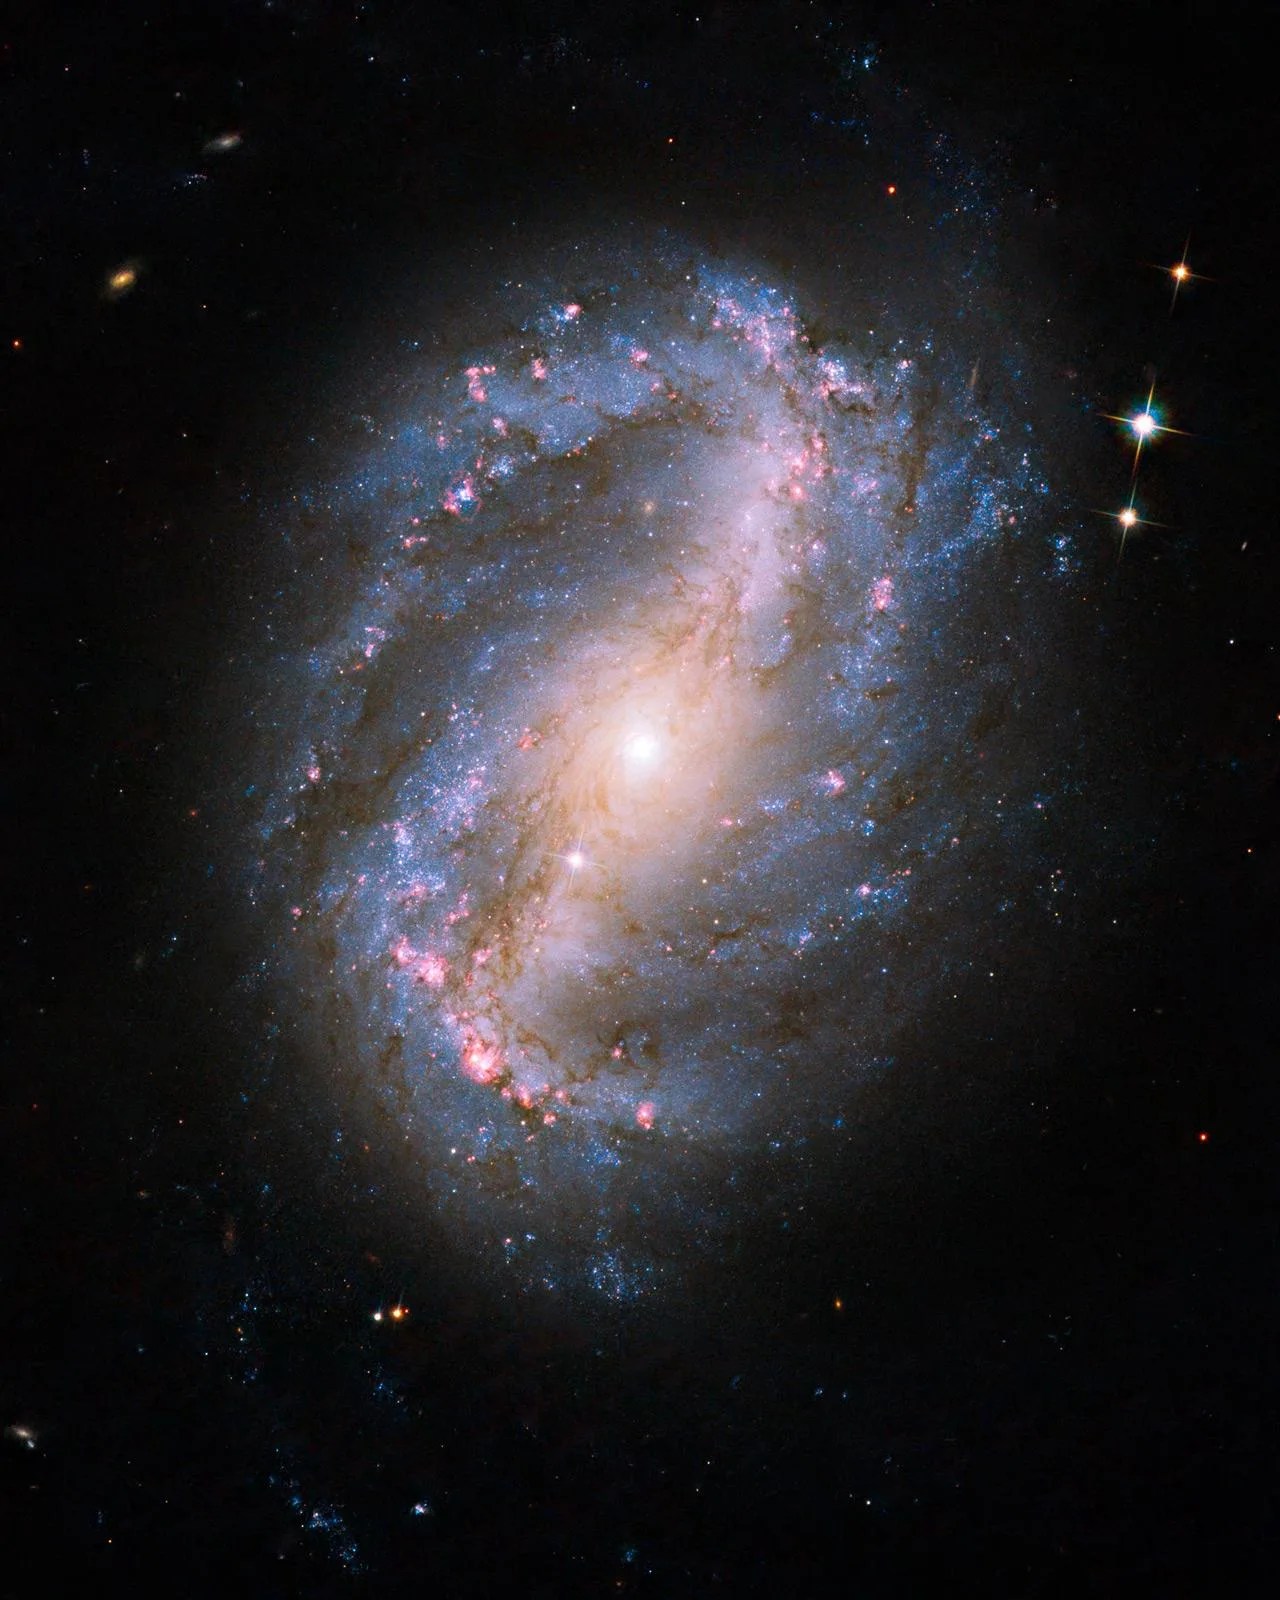 Hubble image of barred spiral galaxy NGC 6217